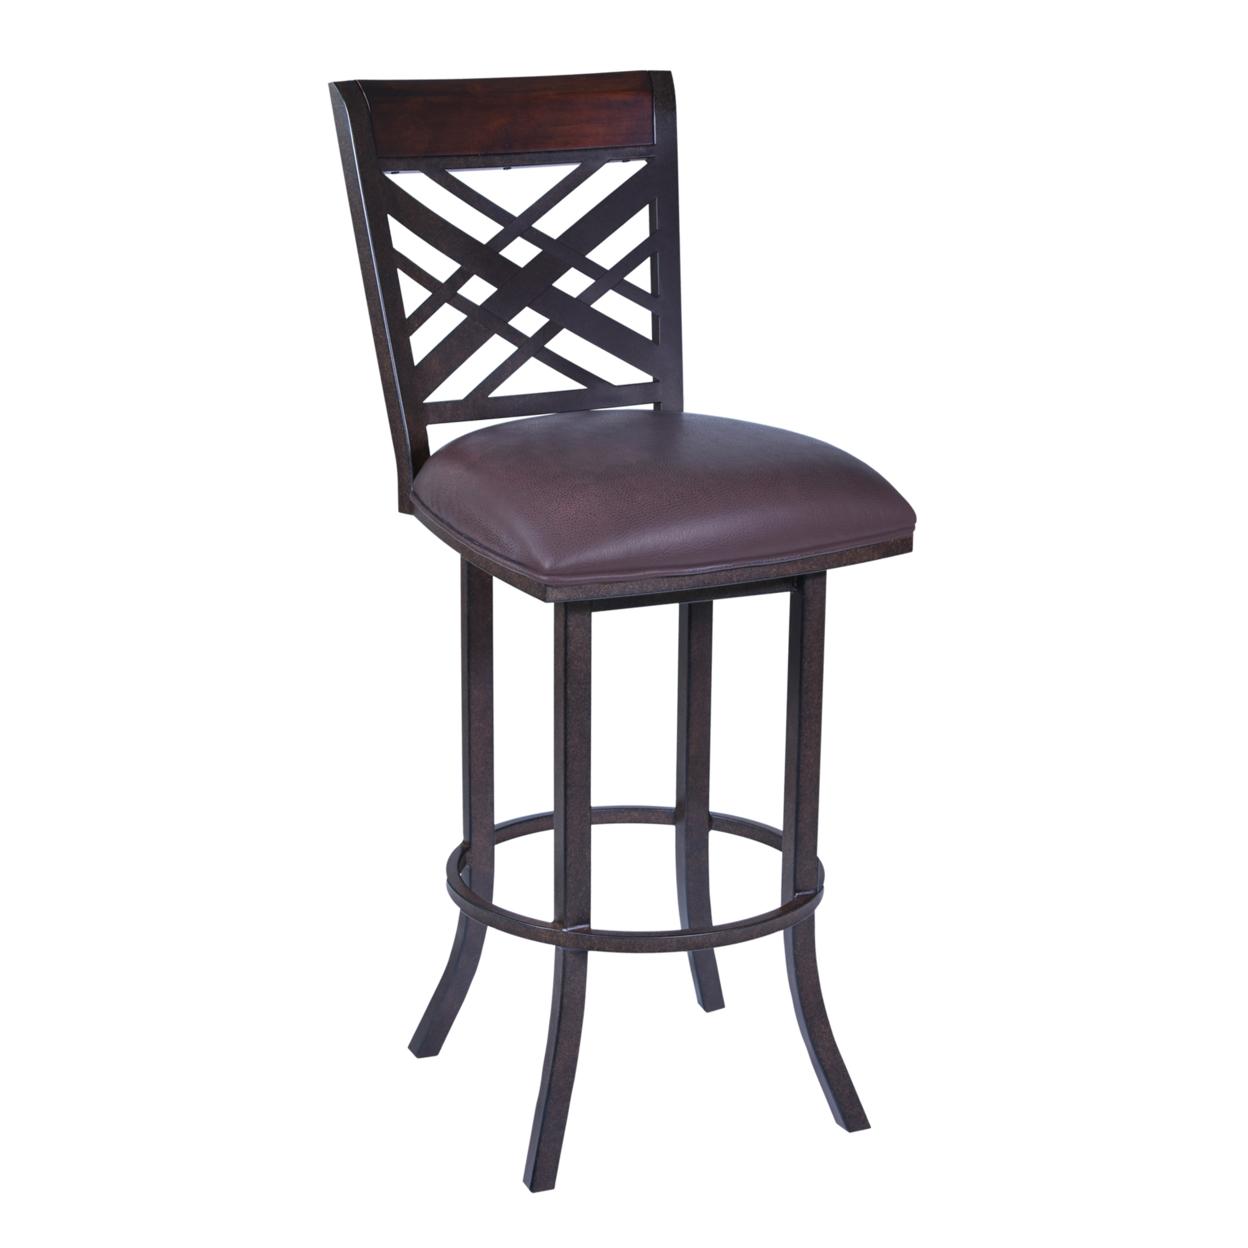 30 Inch Metal Bar Stool With Leatherette Seat And Swivel Mechanism, Brown- Saltoro Sherpi